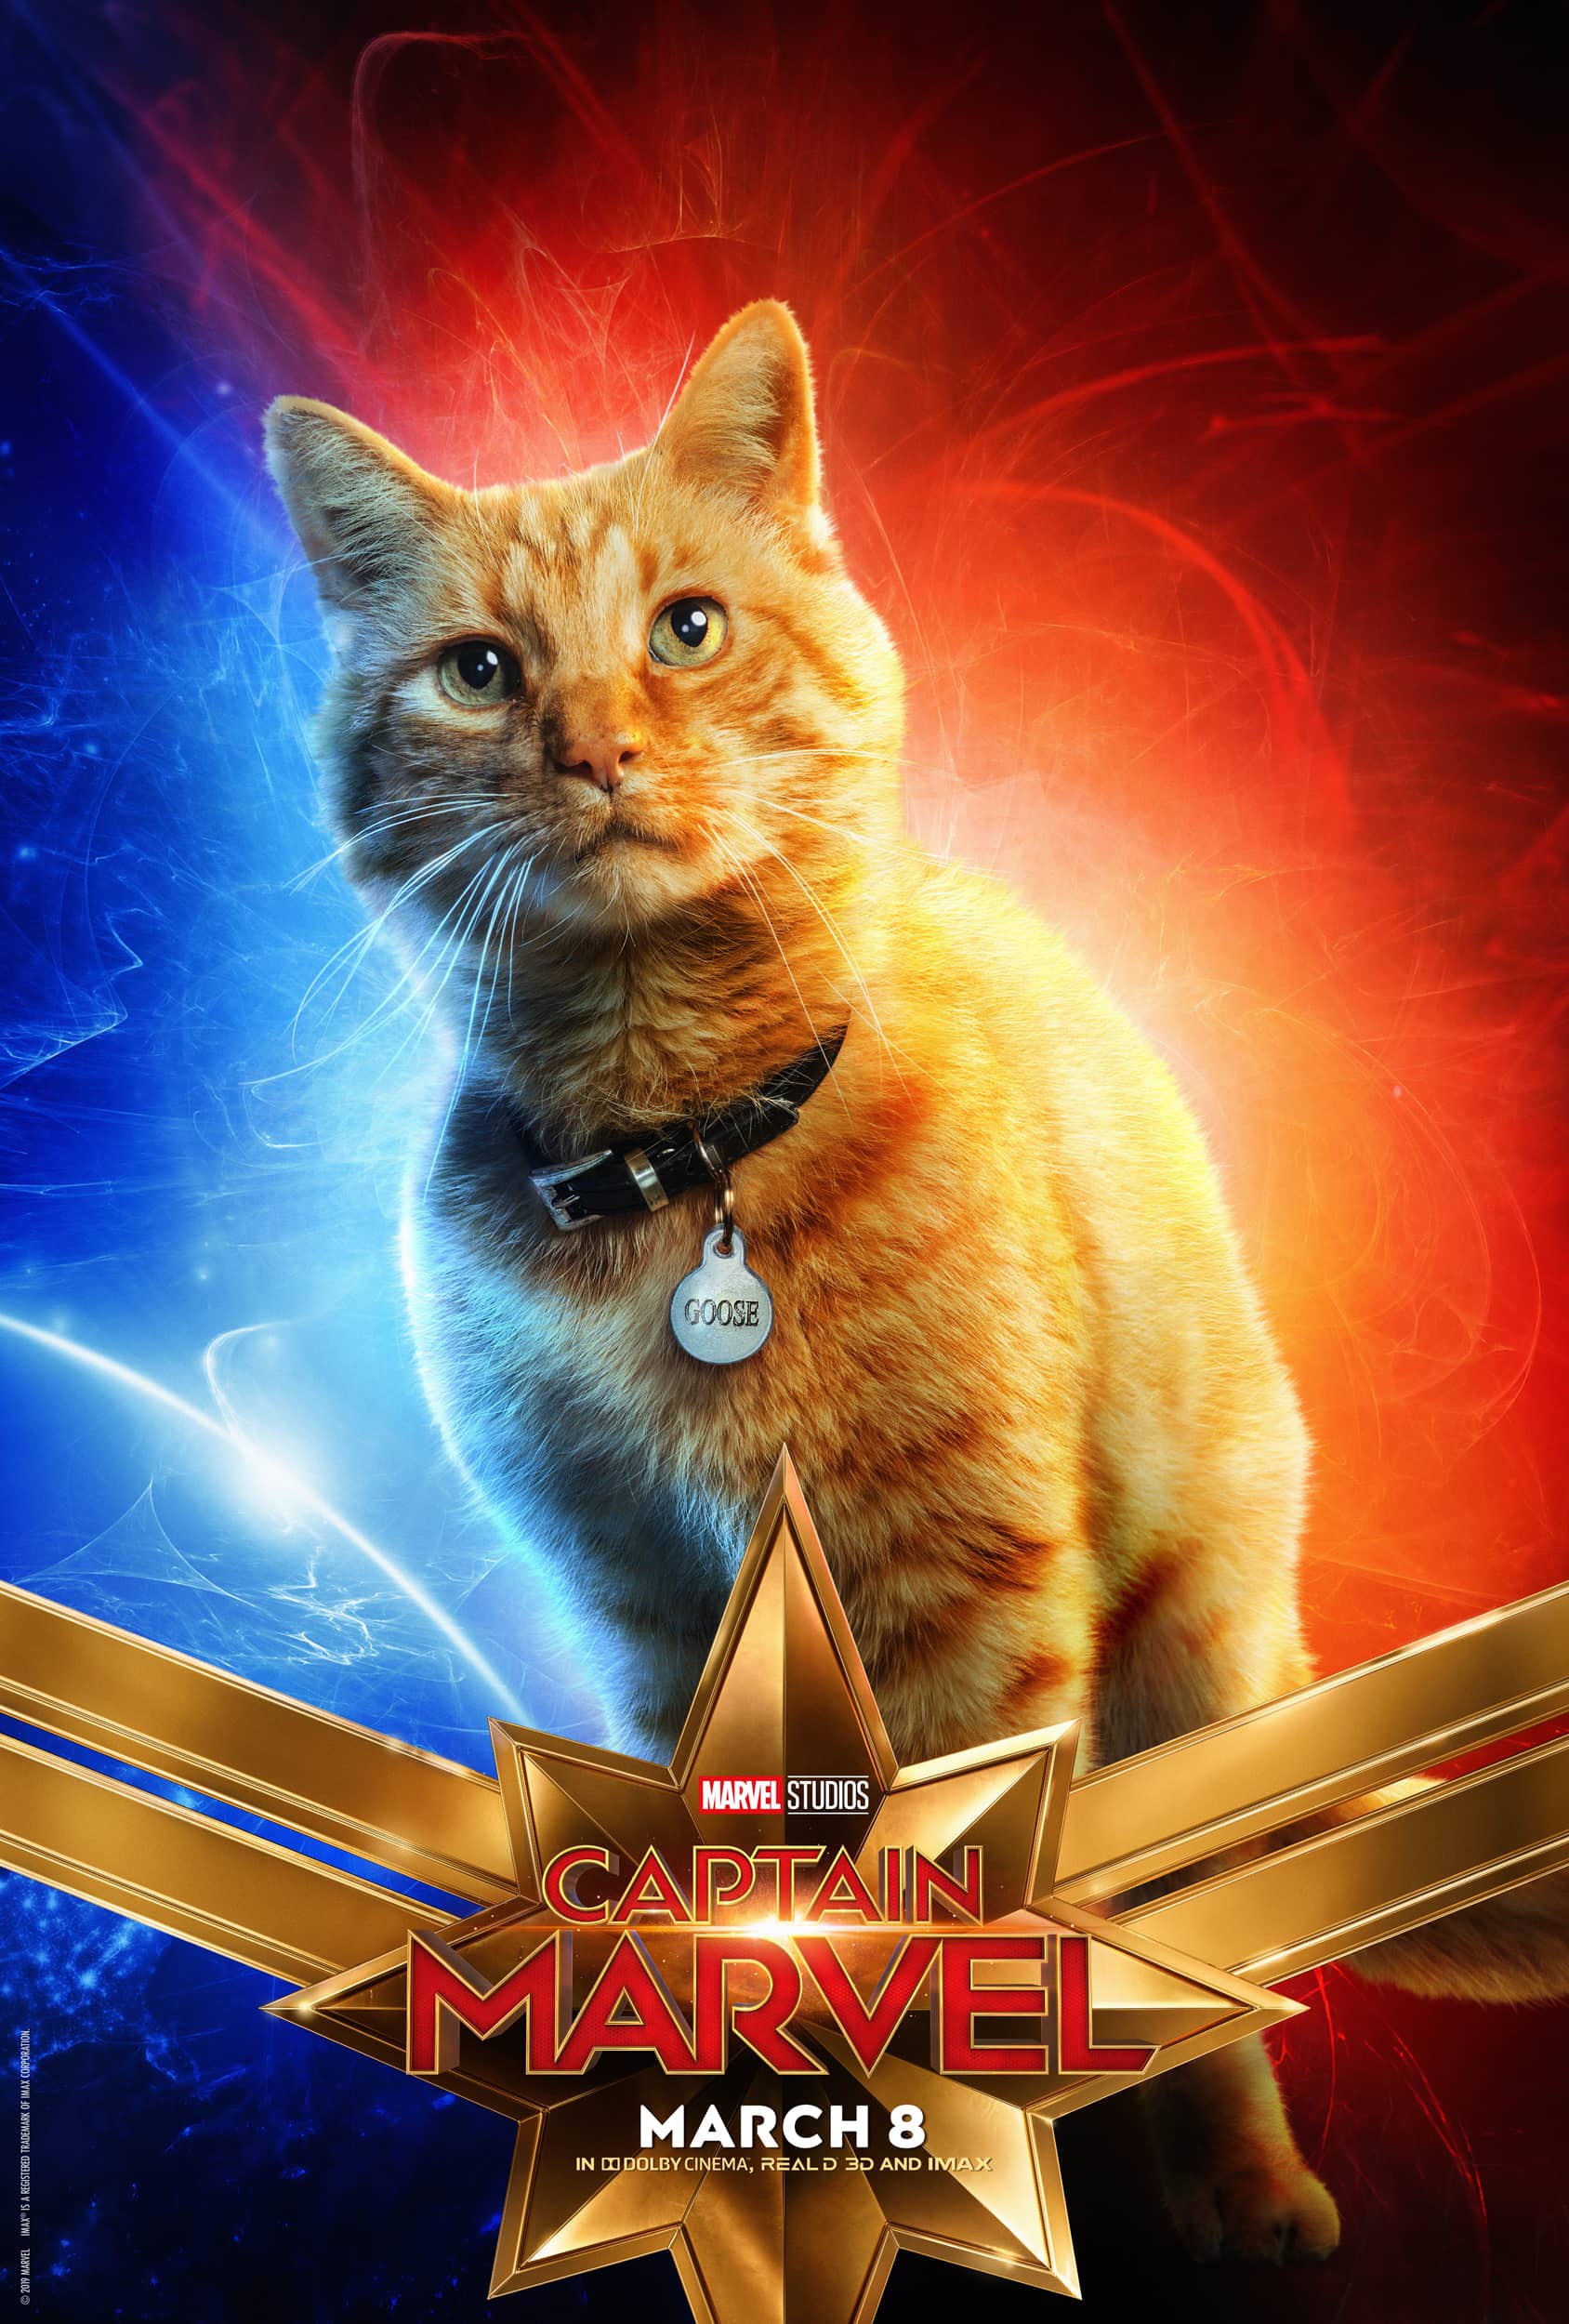 Captain Marvel Character Posters